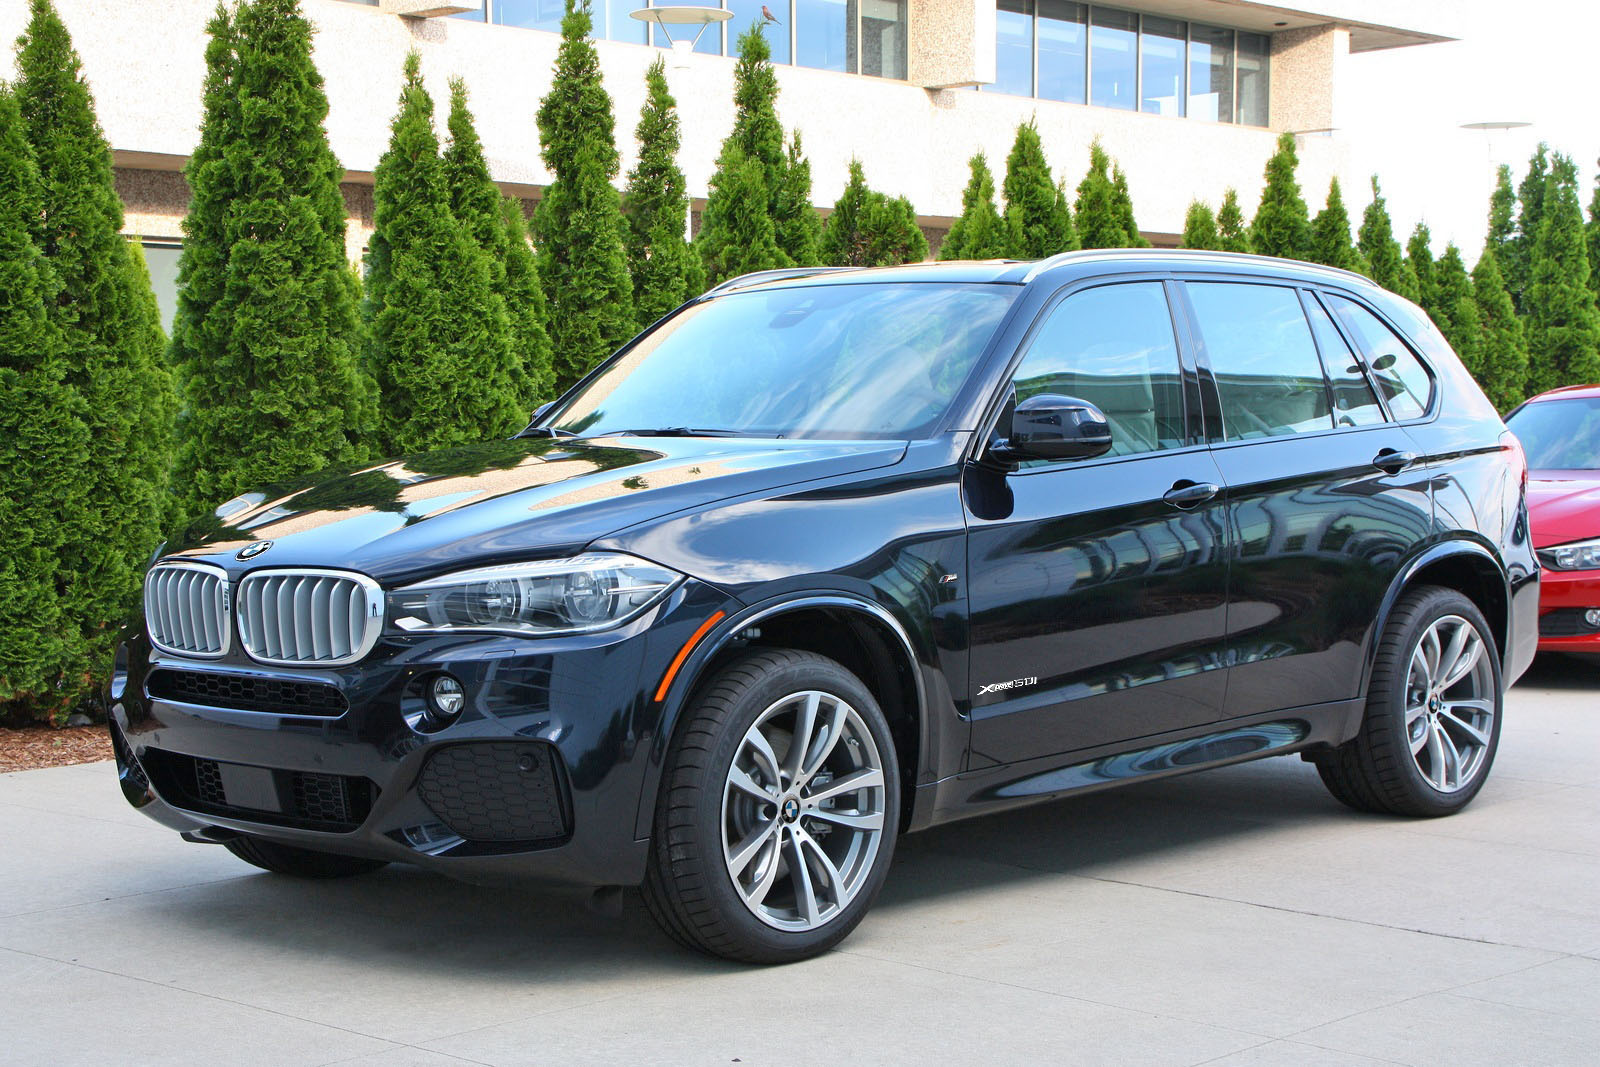 Town+Country BMW | MINI Markham Blog: F15 2014 BMW X5 50i M-Sport Uncovered